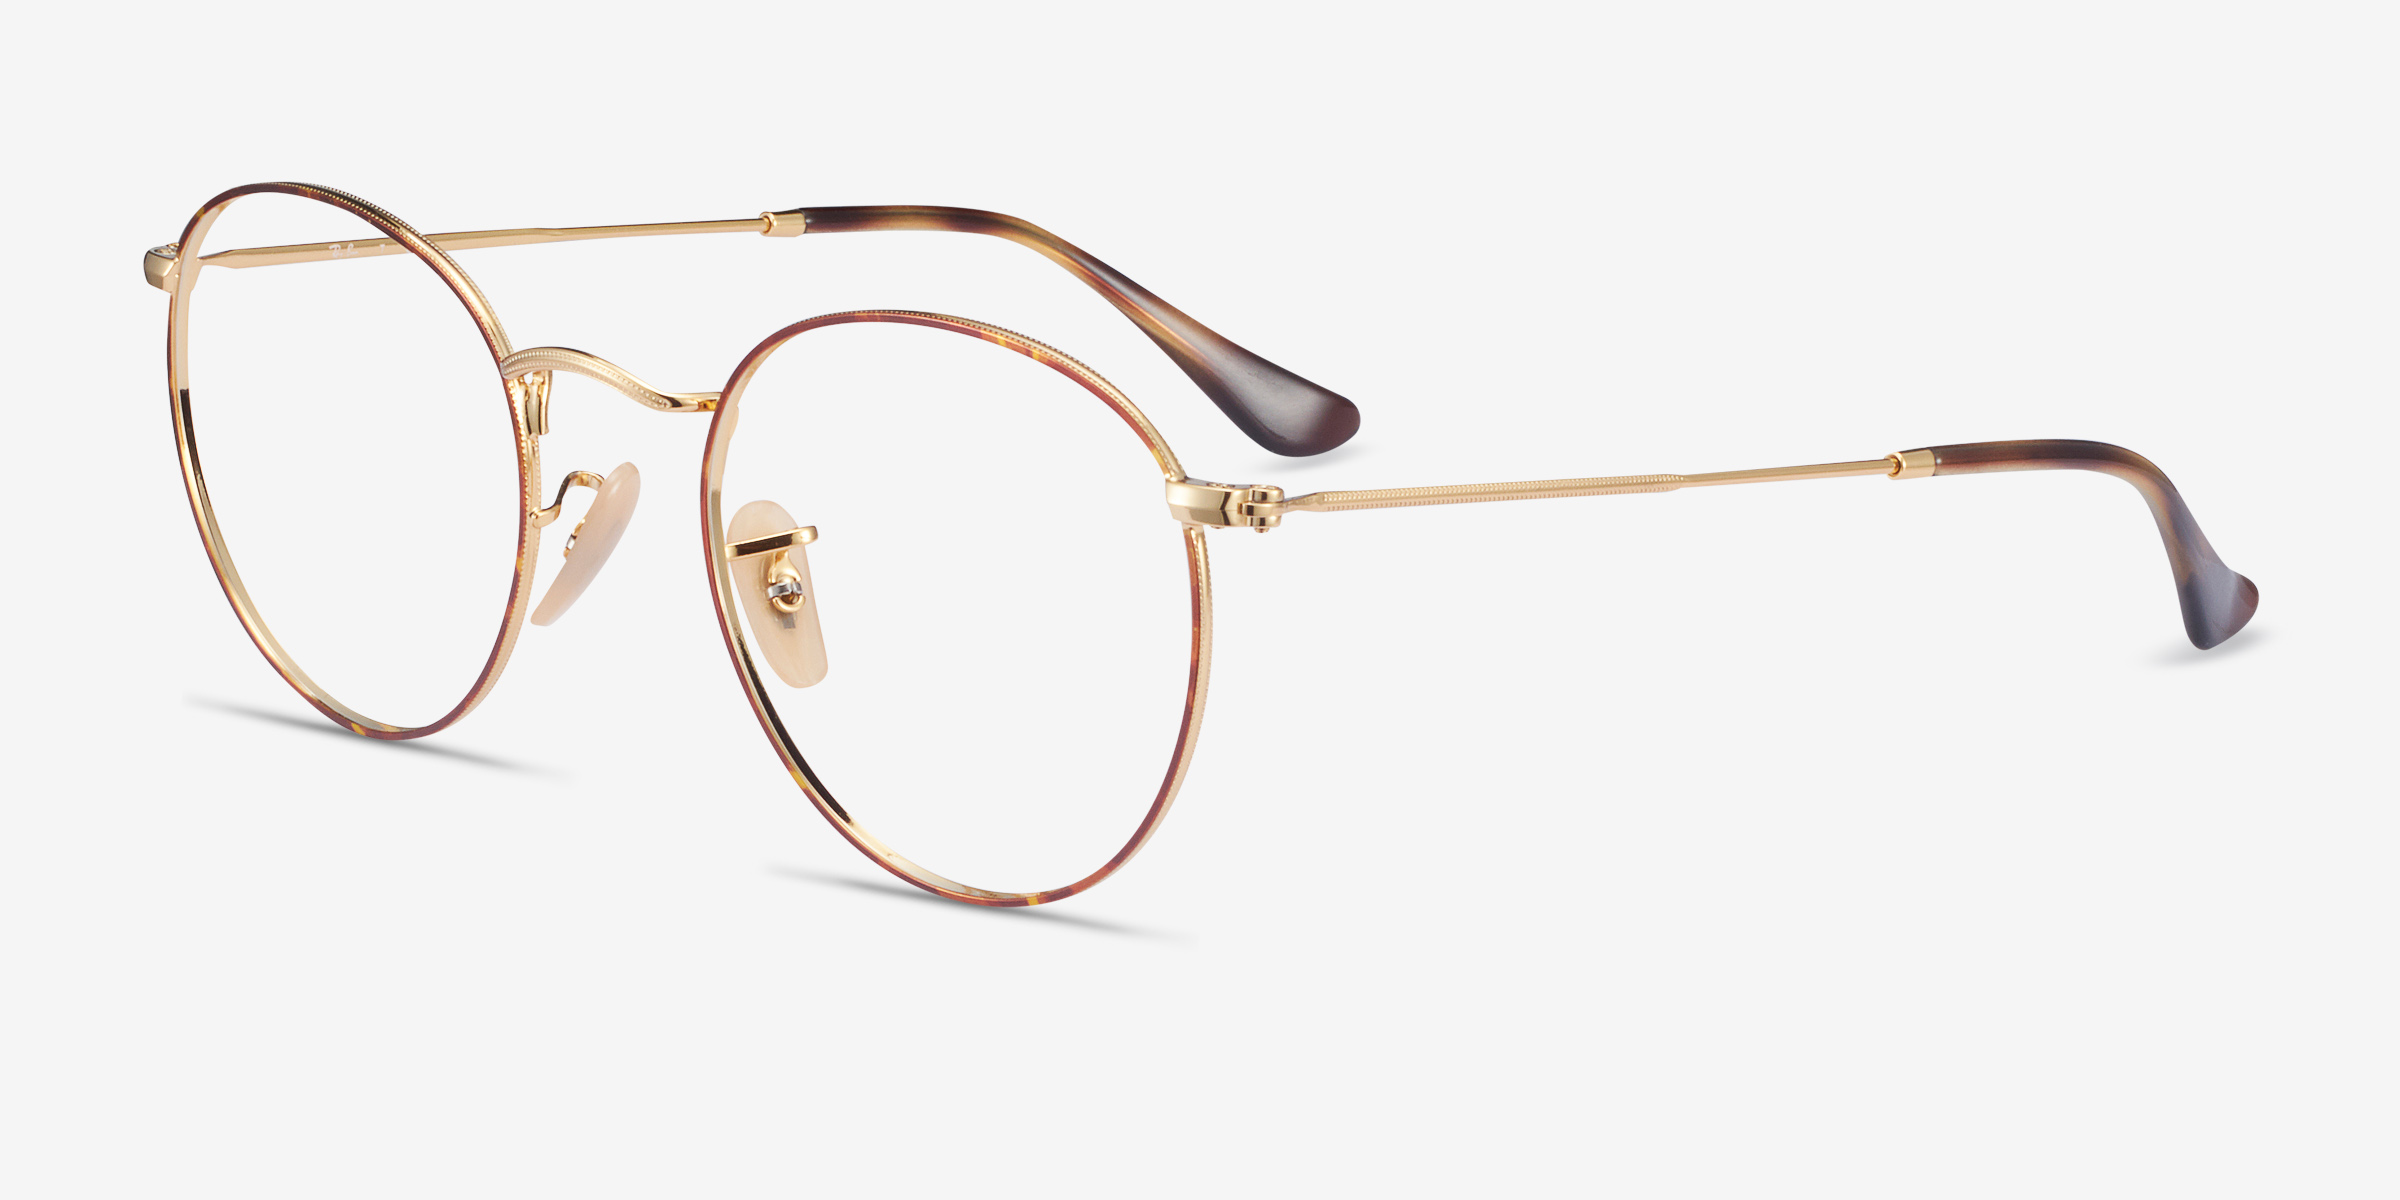 Ray Ban Rb3447v Round Rond Tortoise And Gold Monture Lunettes De Vue